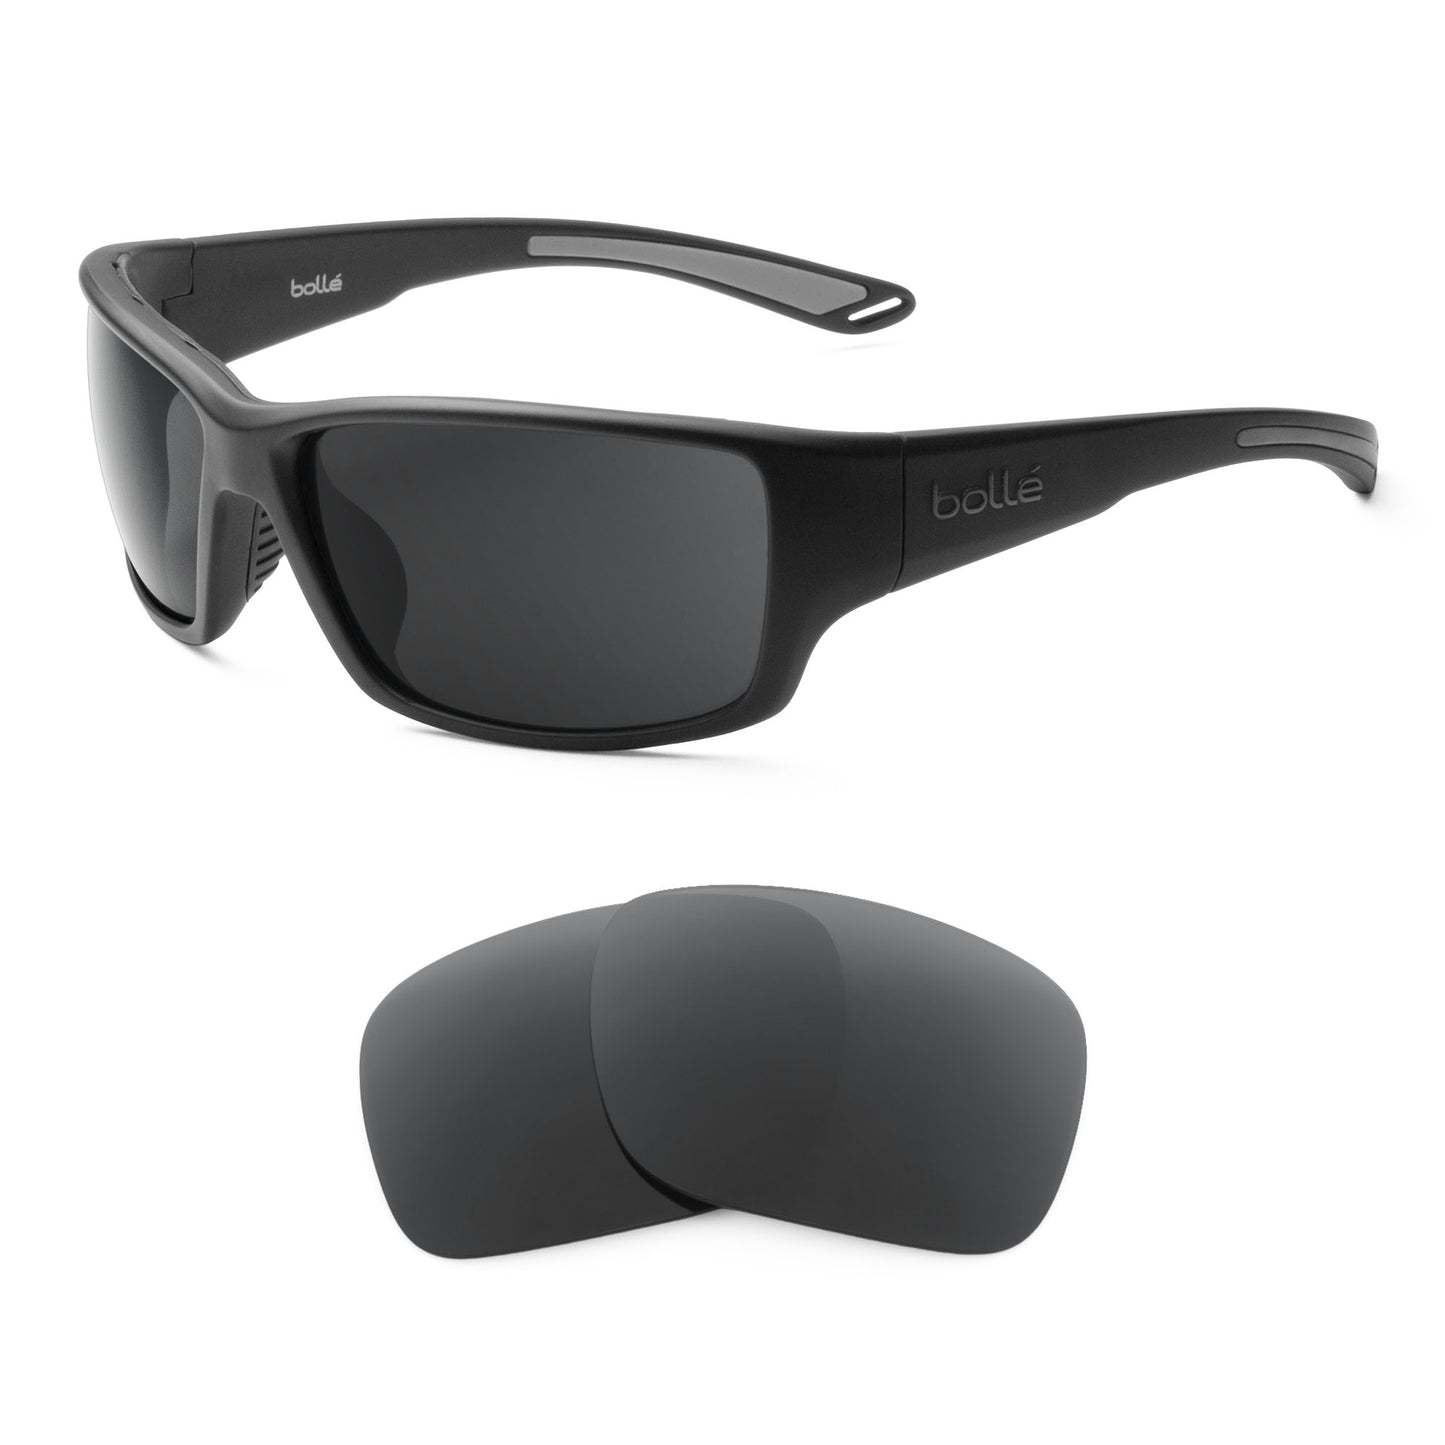 Bolle Kayman sunglasses with replacement lenses